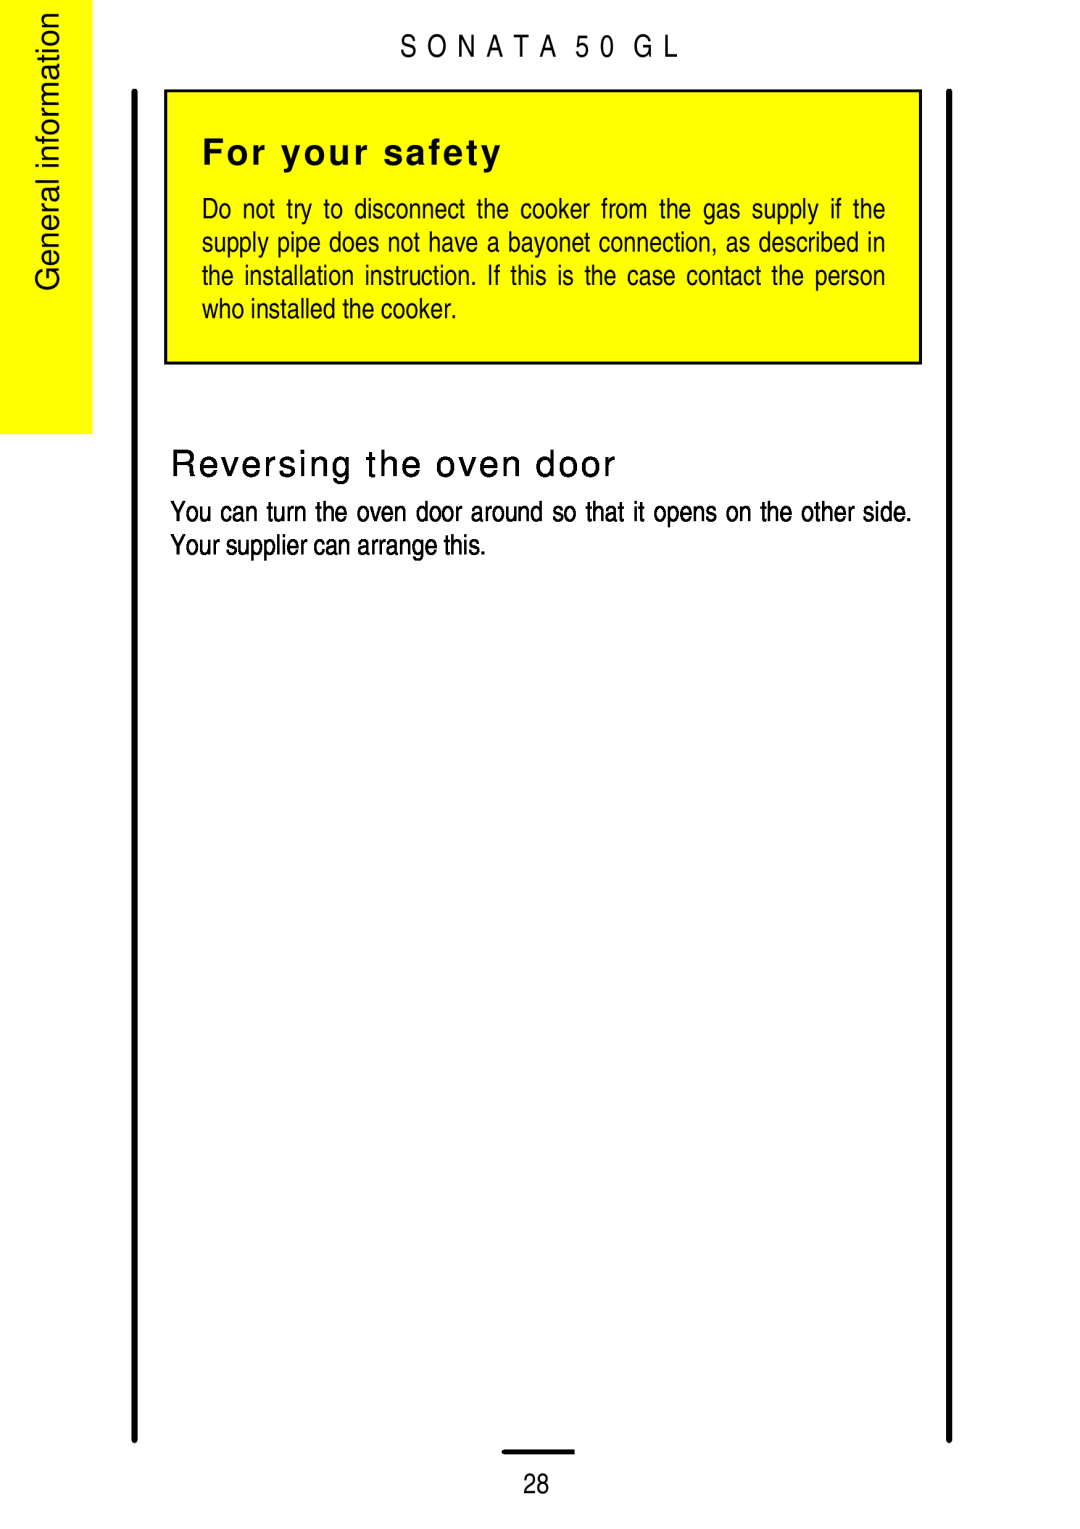 Electrolux installation instructions Reversing the oven door, For your safety, General information, S O N A T A 5 0 G L 